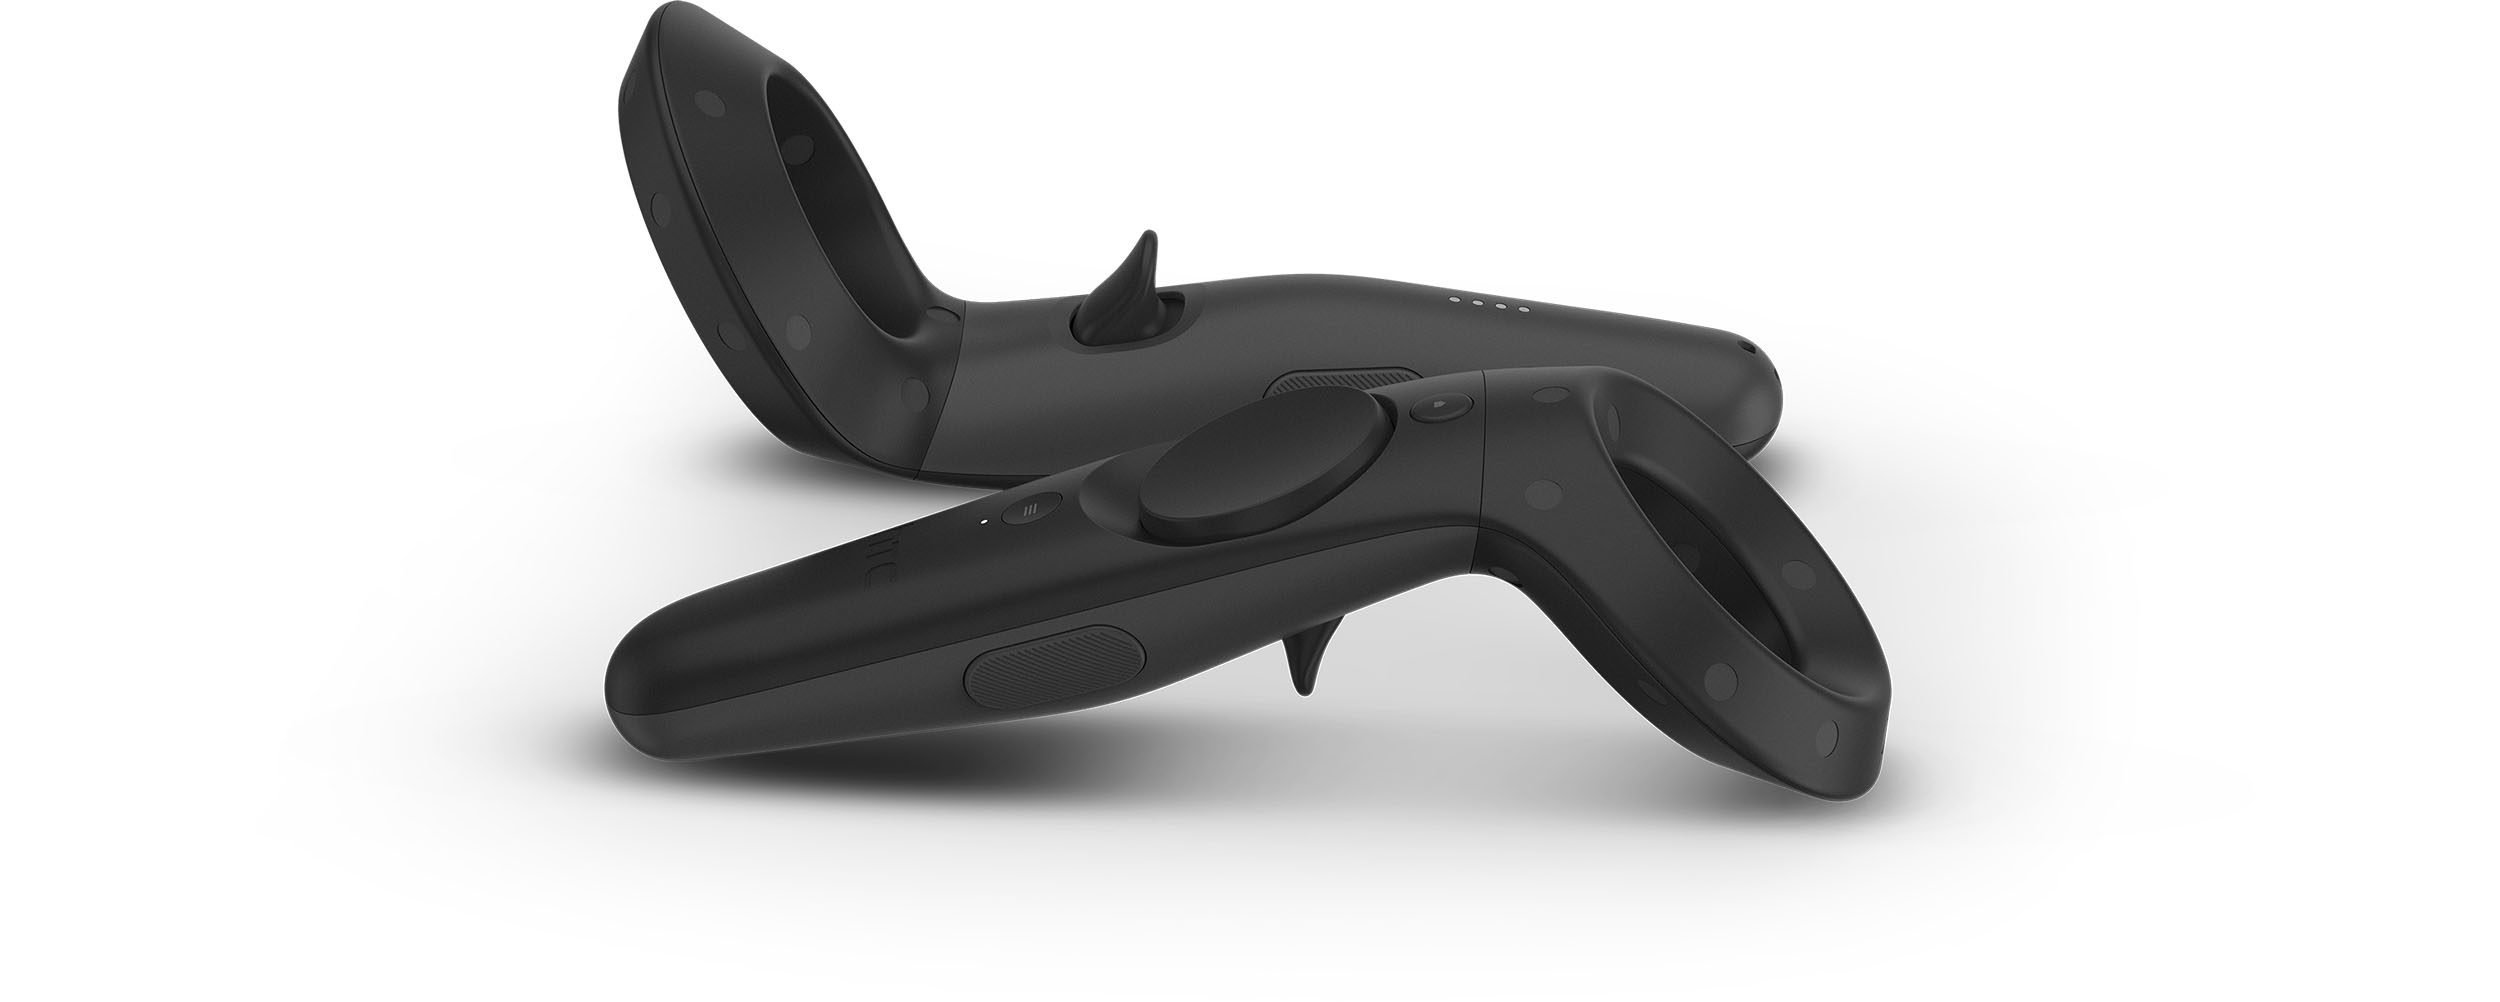 See Also: New Images for 2nd HTC Vive Developer Kit Supposedly Leaked